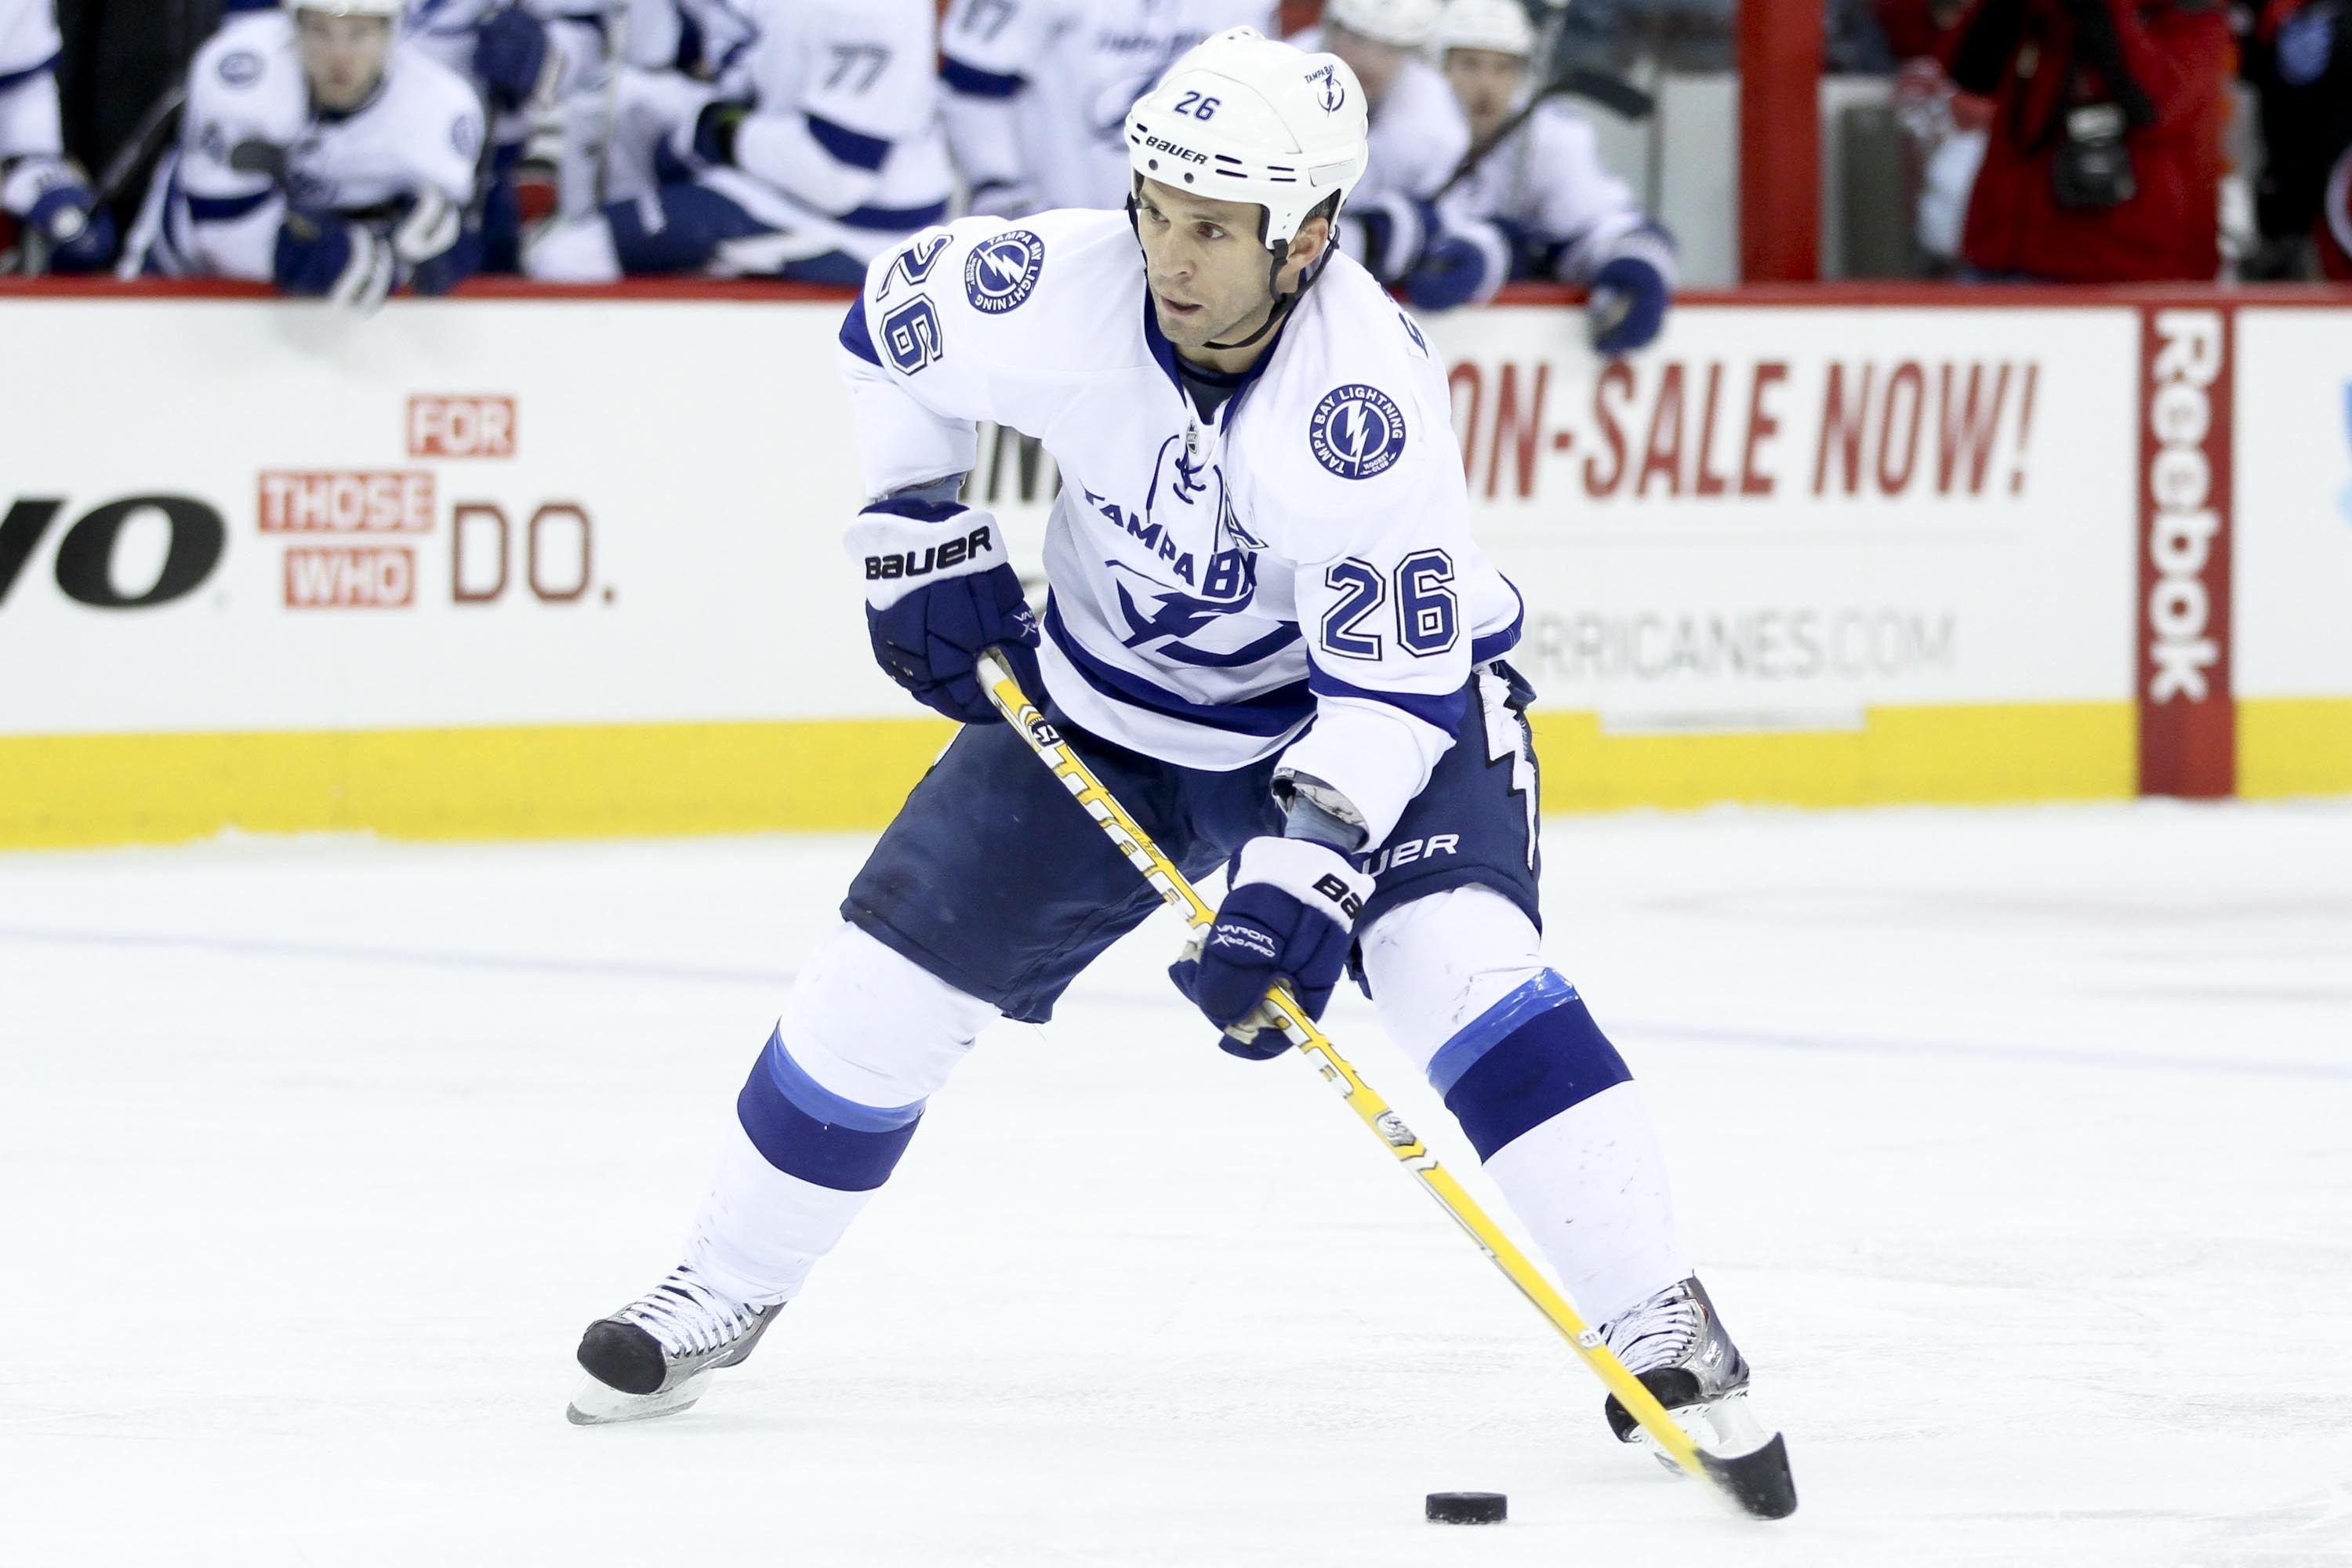 Famous NHL player Martin St. Louis wallpaper and image